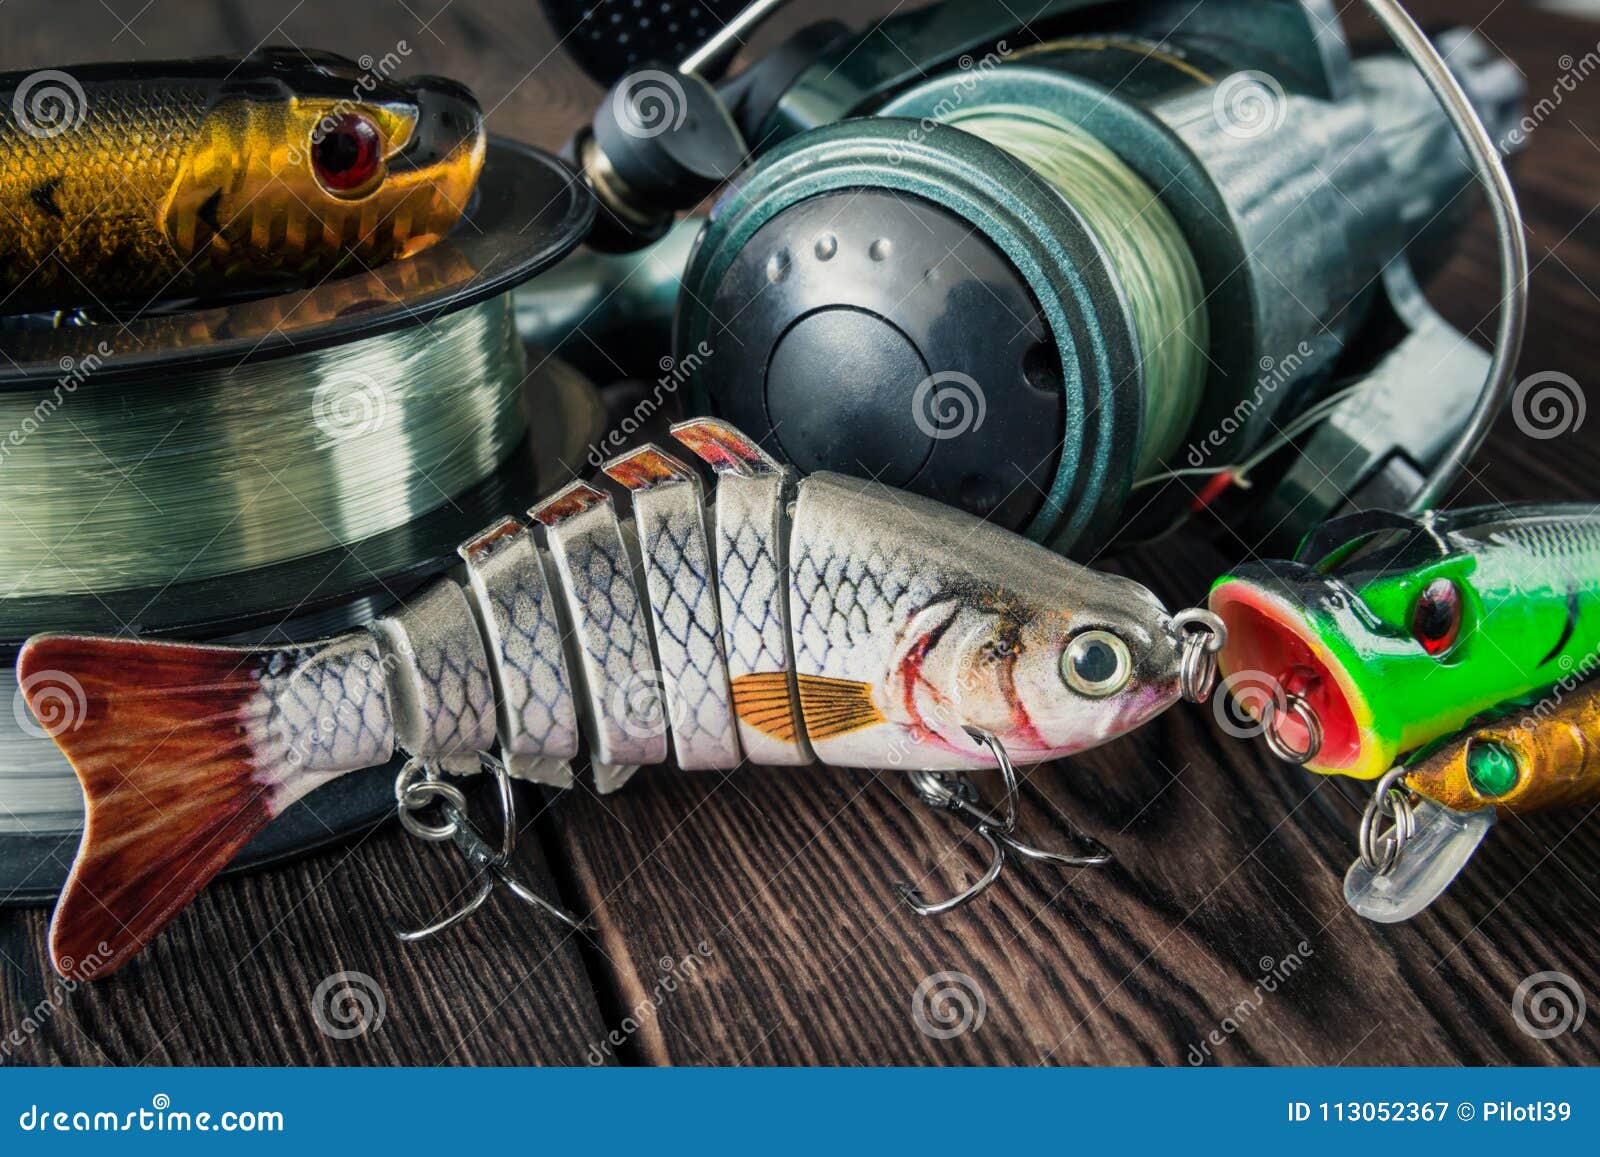 https://thumbs.dreamstime.com/z/lures-fish-spinning-baits-wobblers-poppers-coils-fishing-line-spool-wooden-background-113052367.jpg